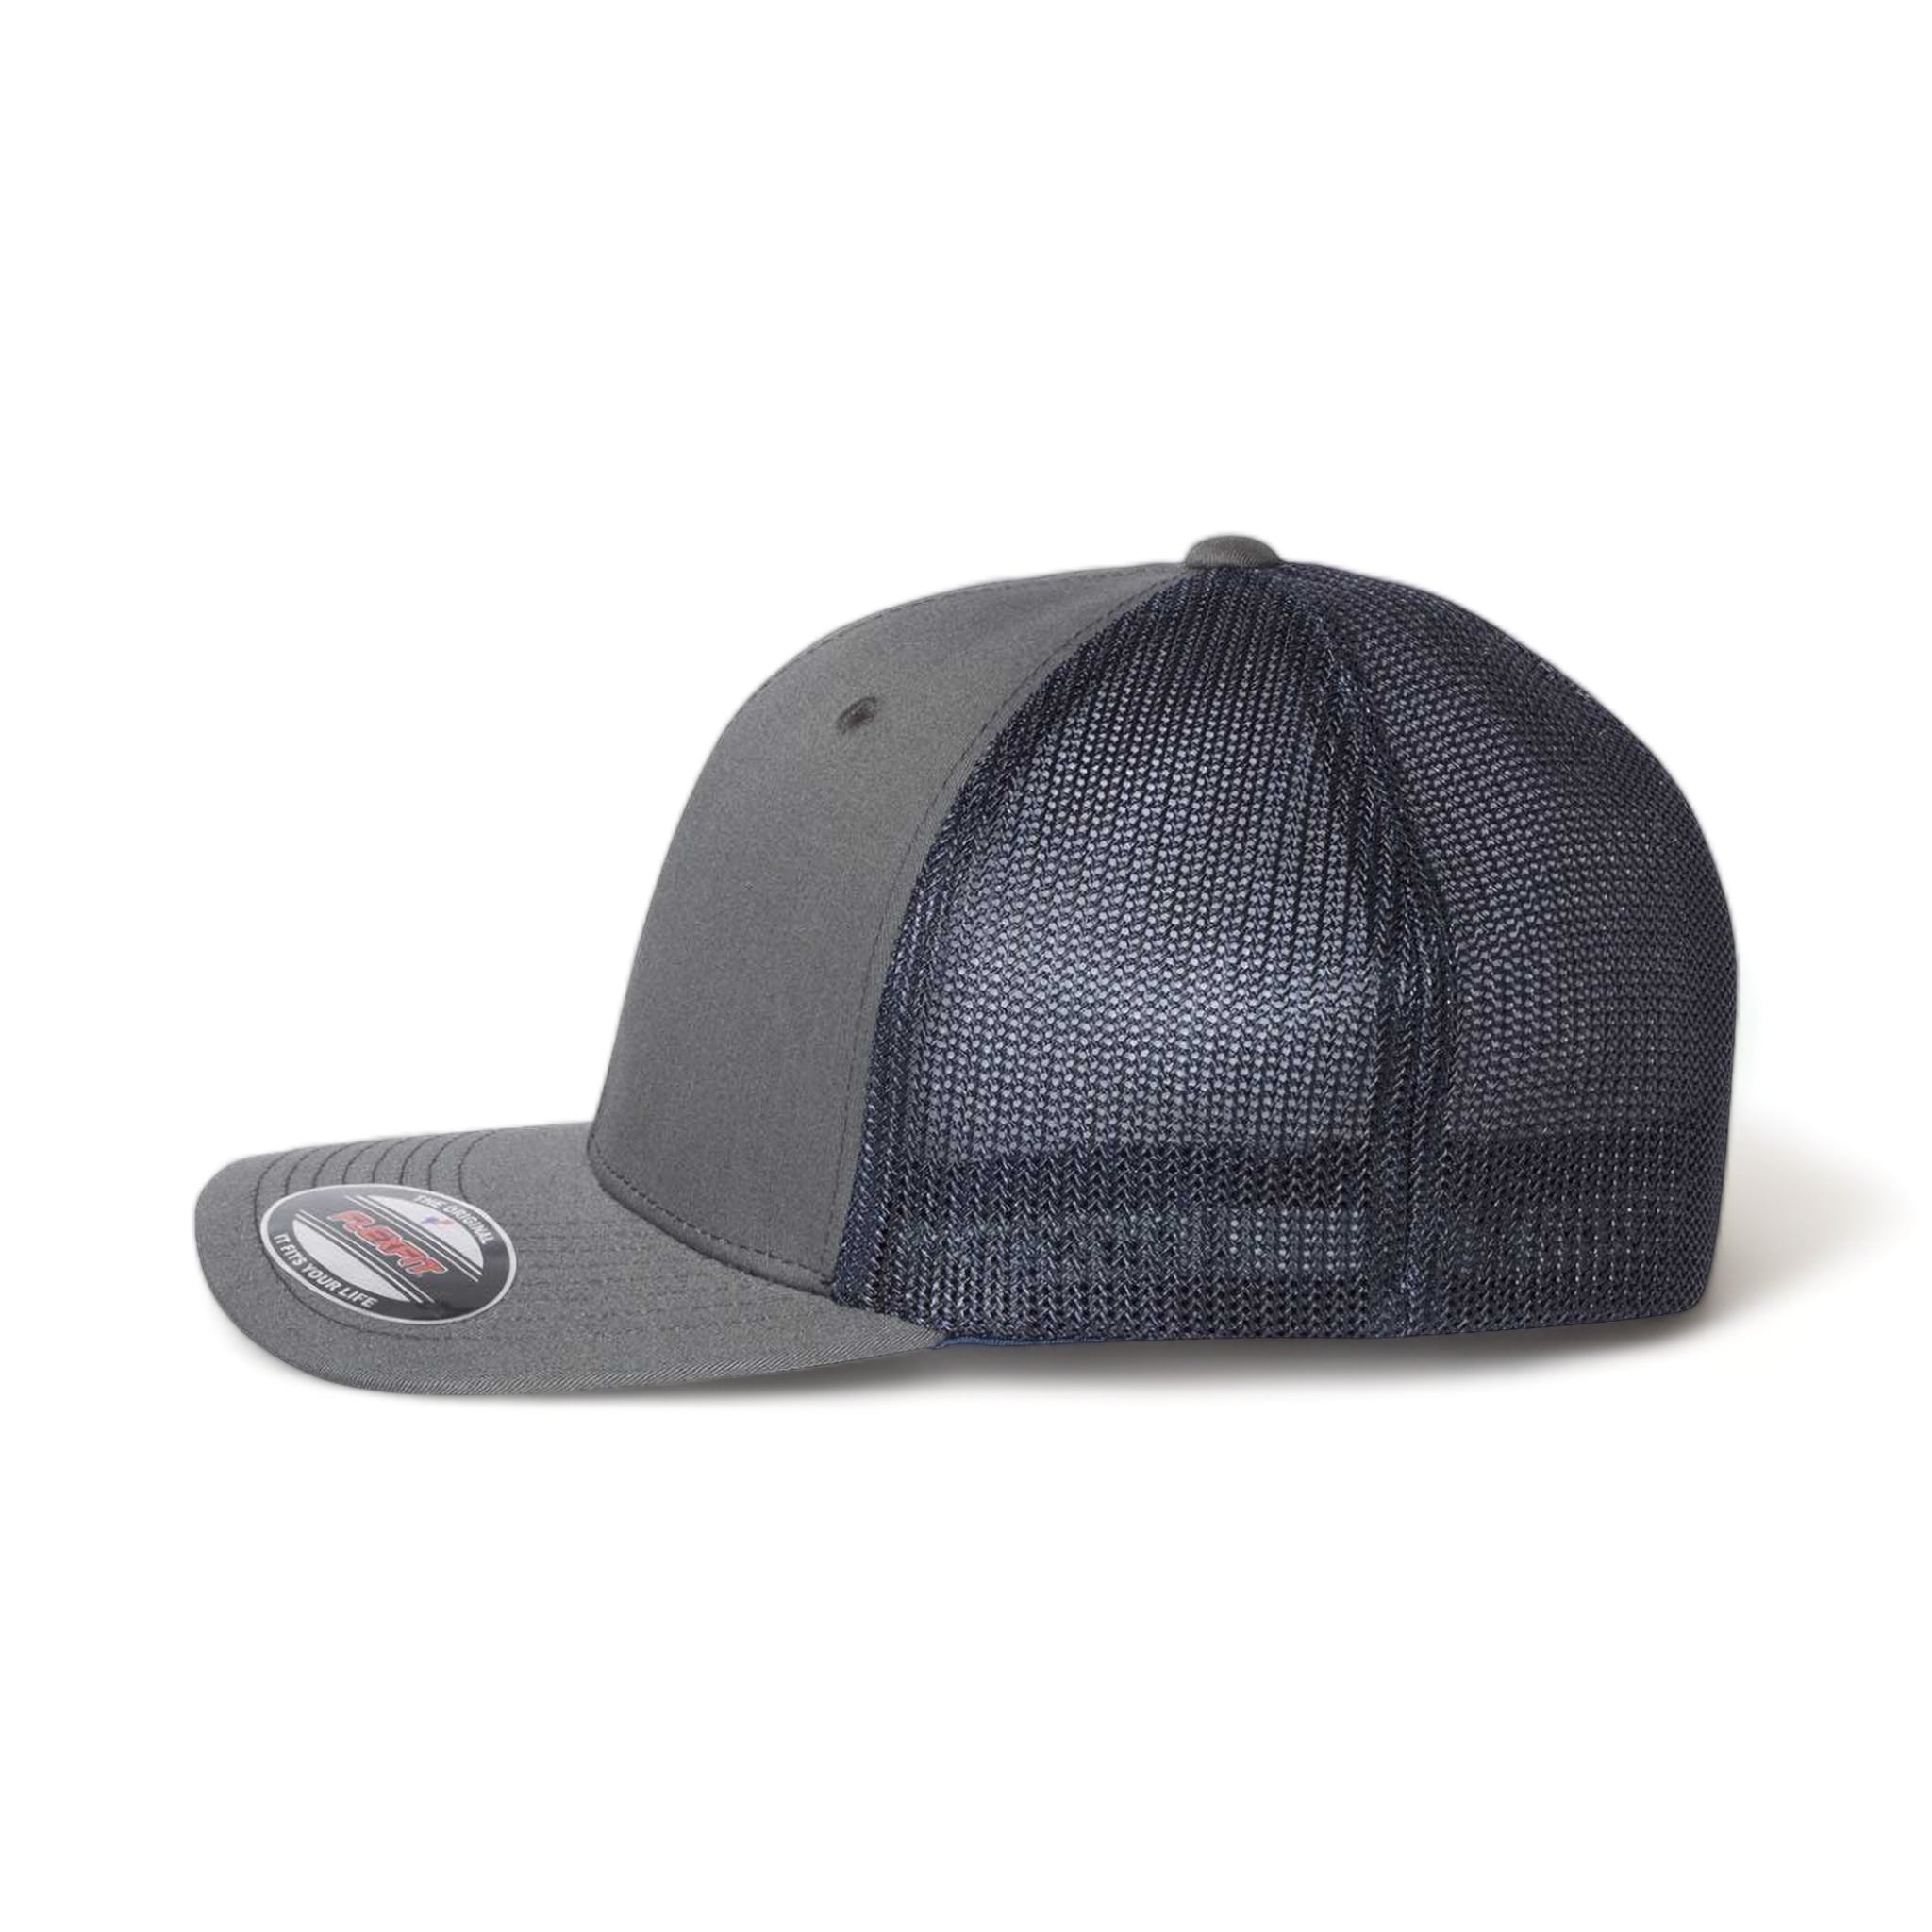 Side view of Flexfit 6511 custom hat in charcoal and navy